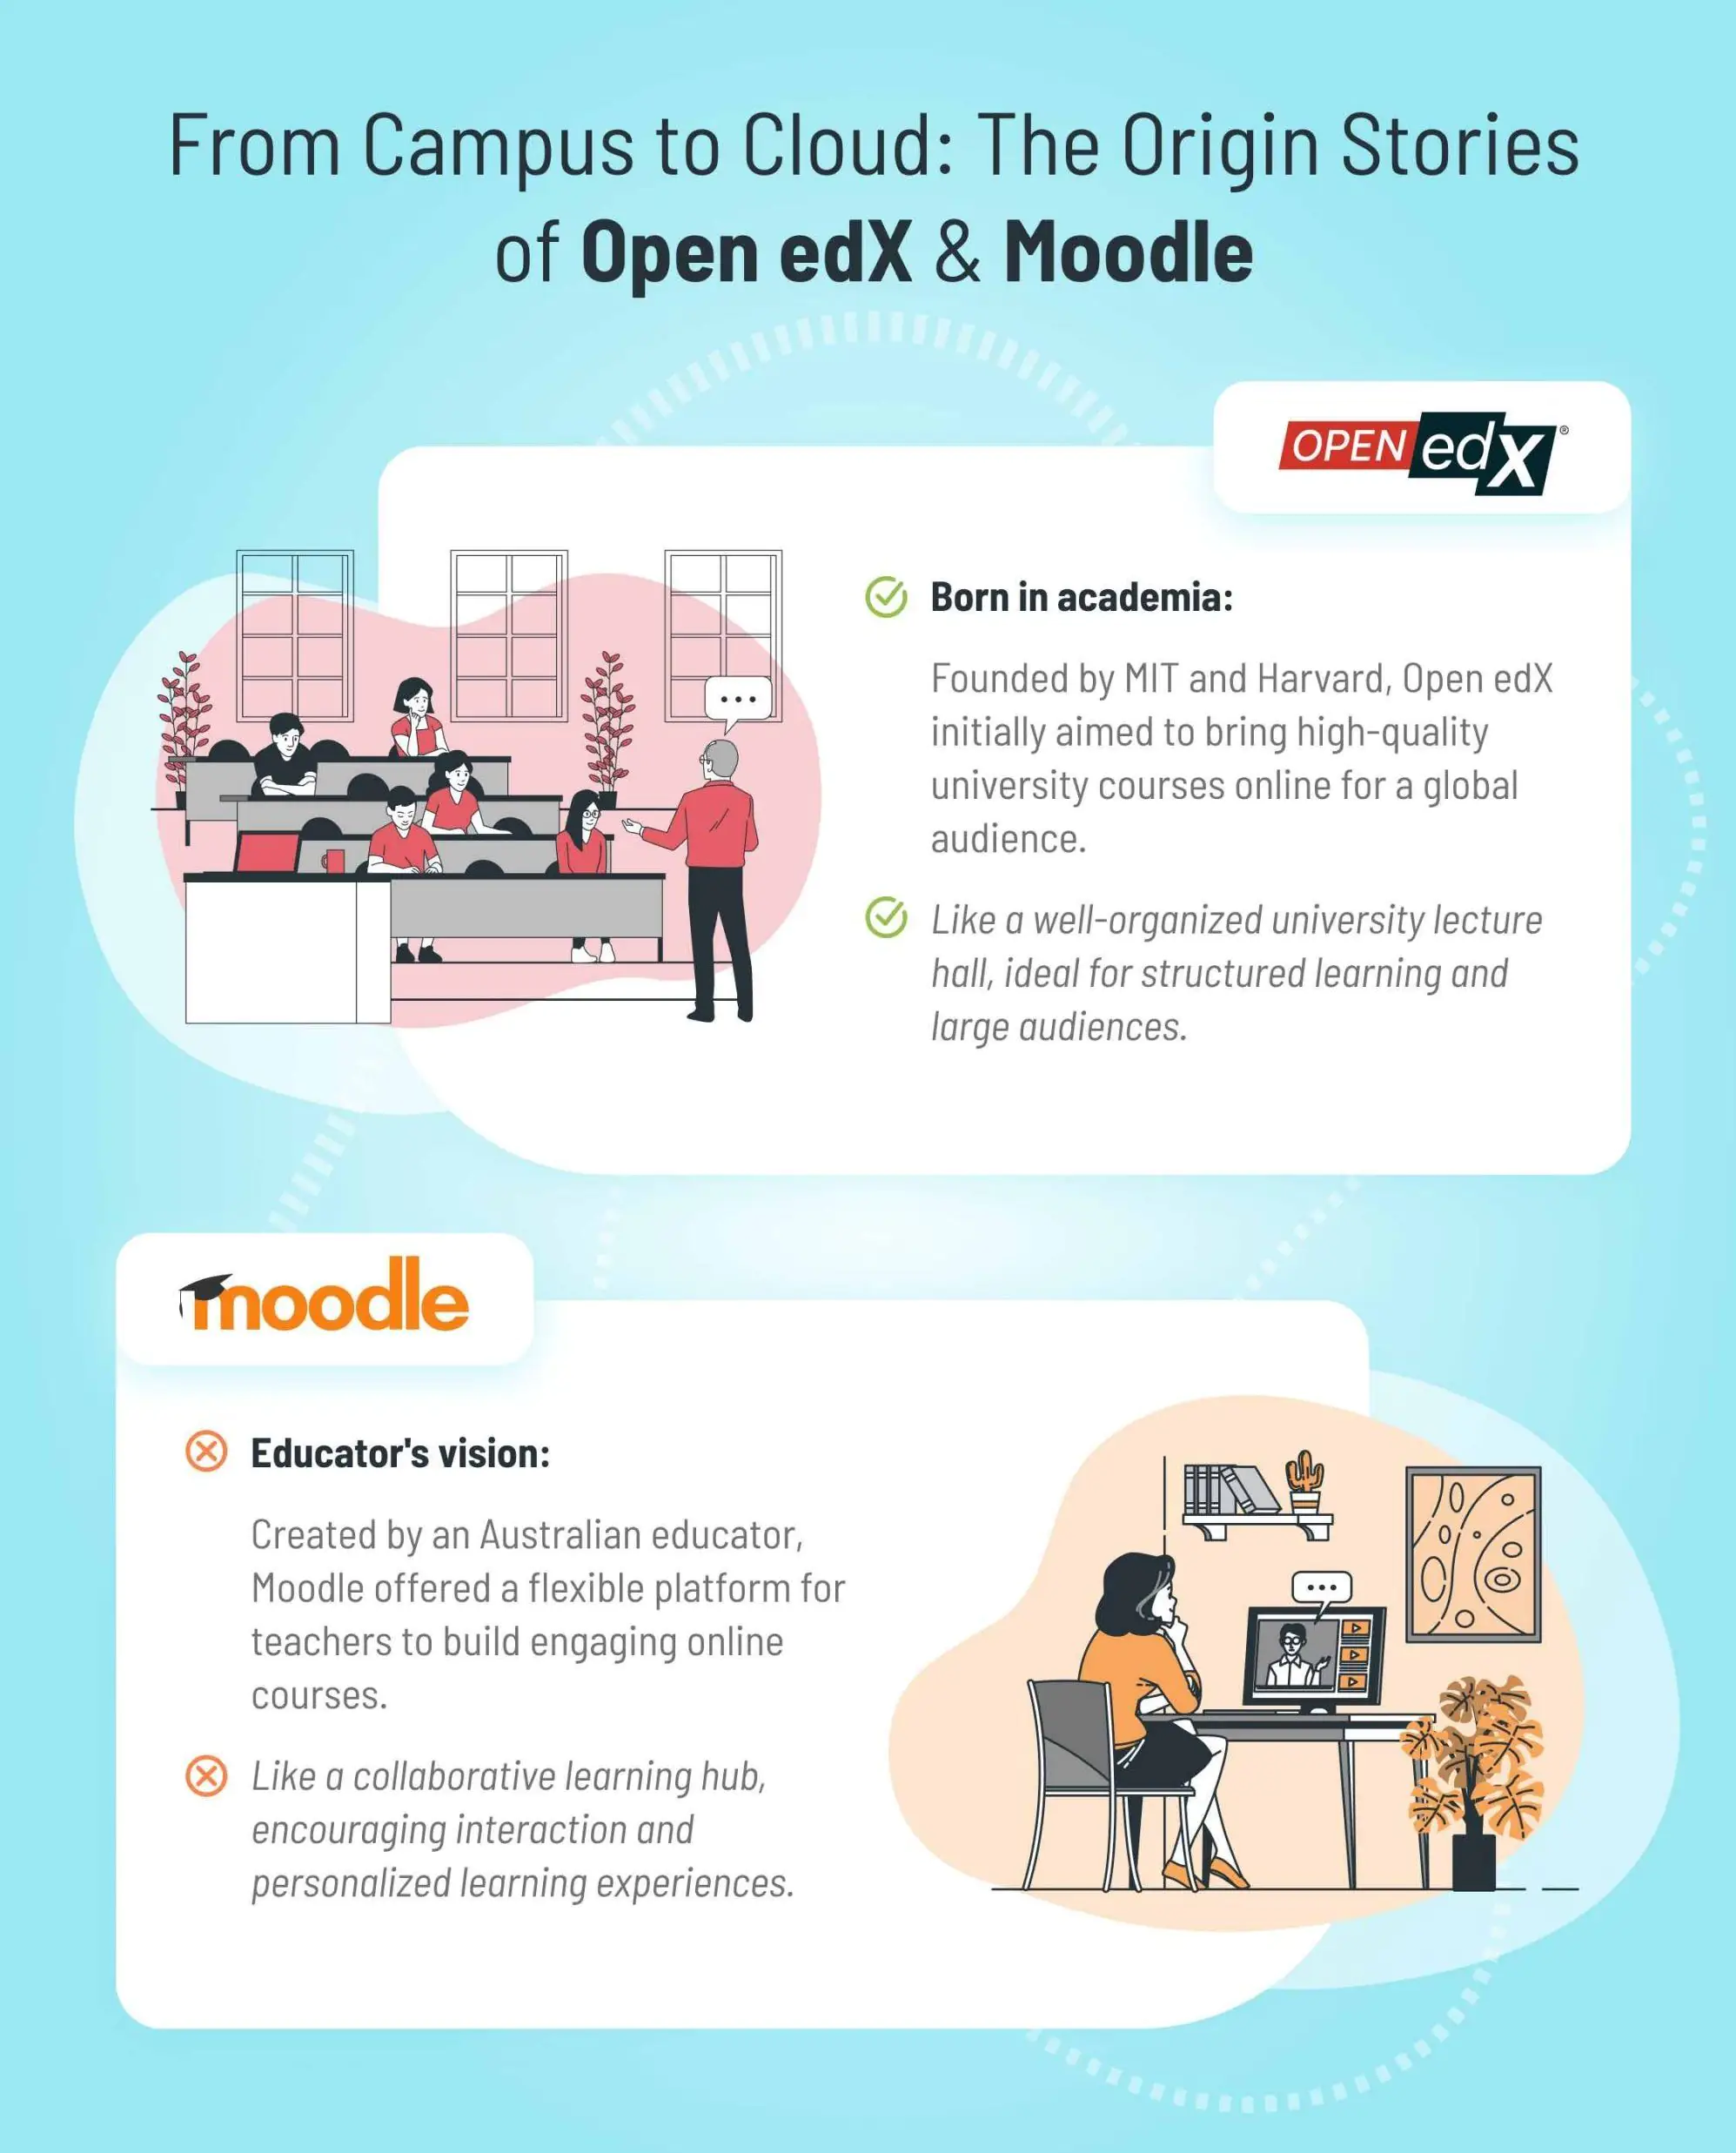 Who thrives with the Open edX platform and Moodle